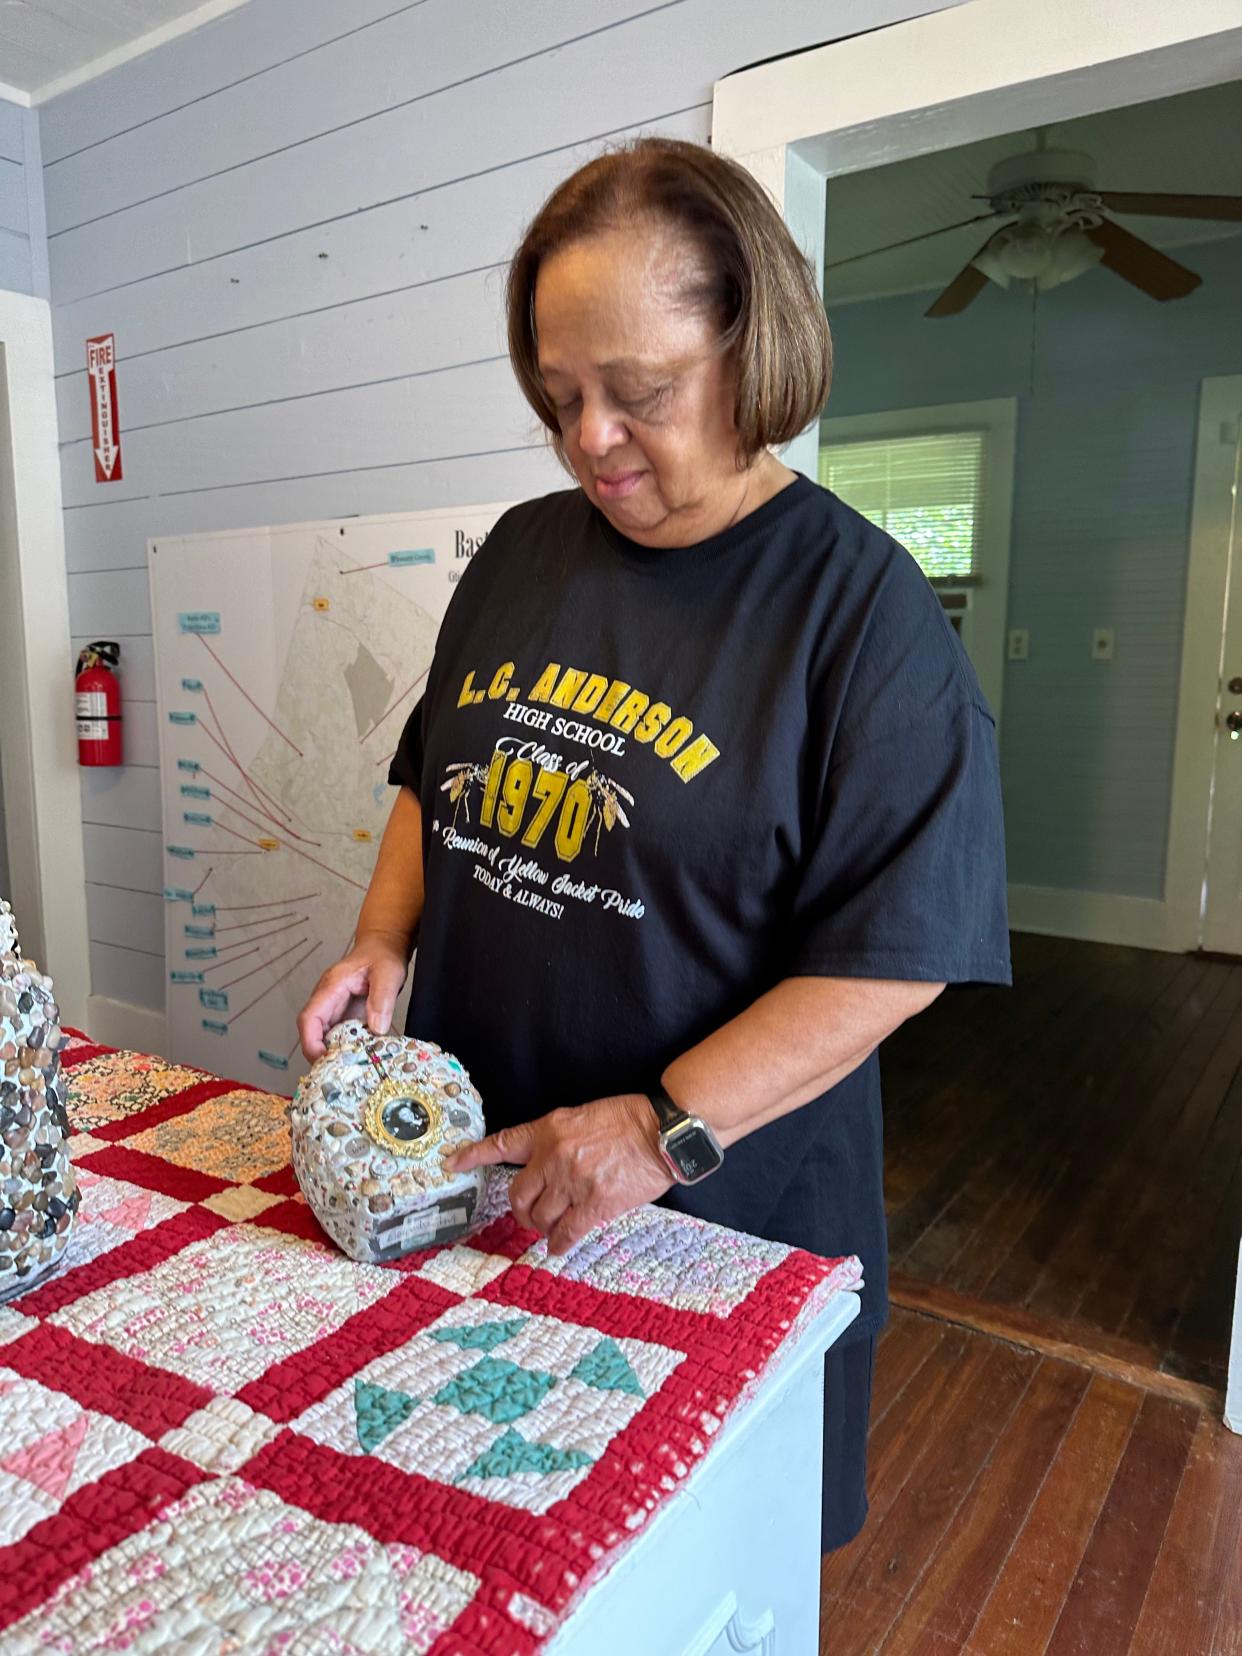 Belinda Davis describes her memory jug that honors her mother. Davis said her mother sacrificed a lot of her life to support her family and their dreams.